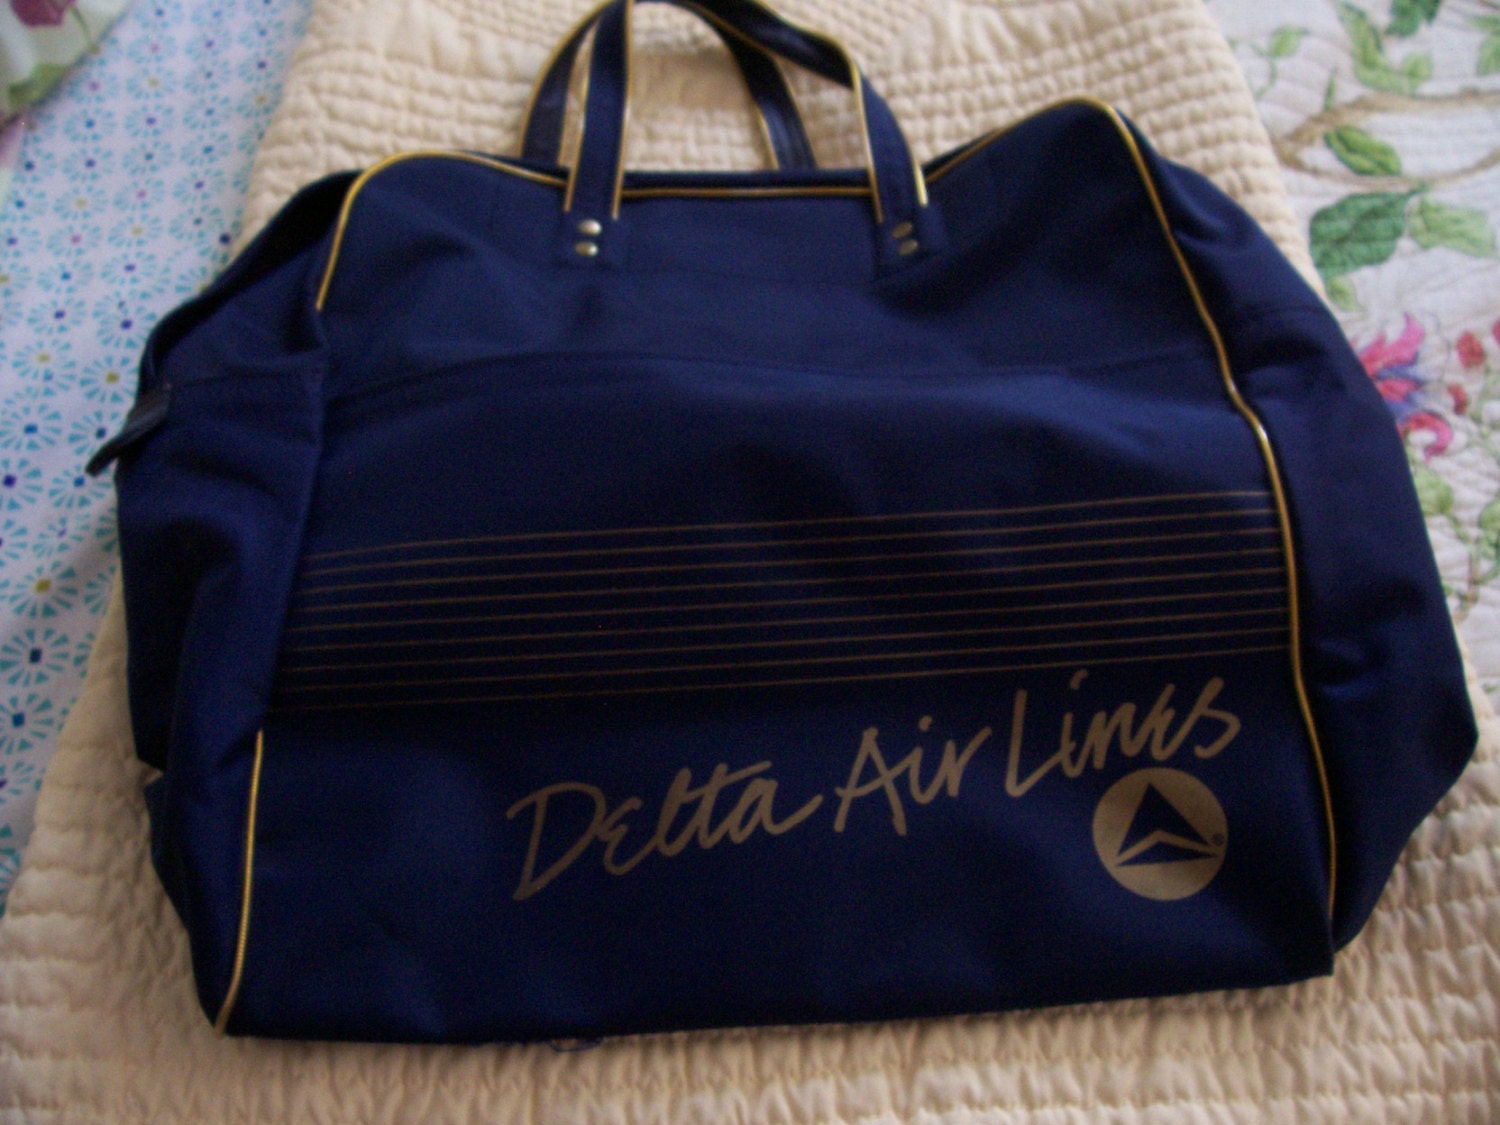 Vintage Delta Air lines Flight Bag Carry On luggage/ by kd15